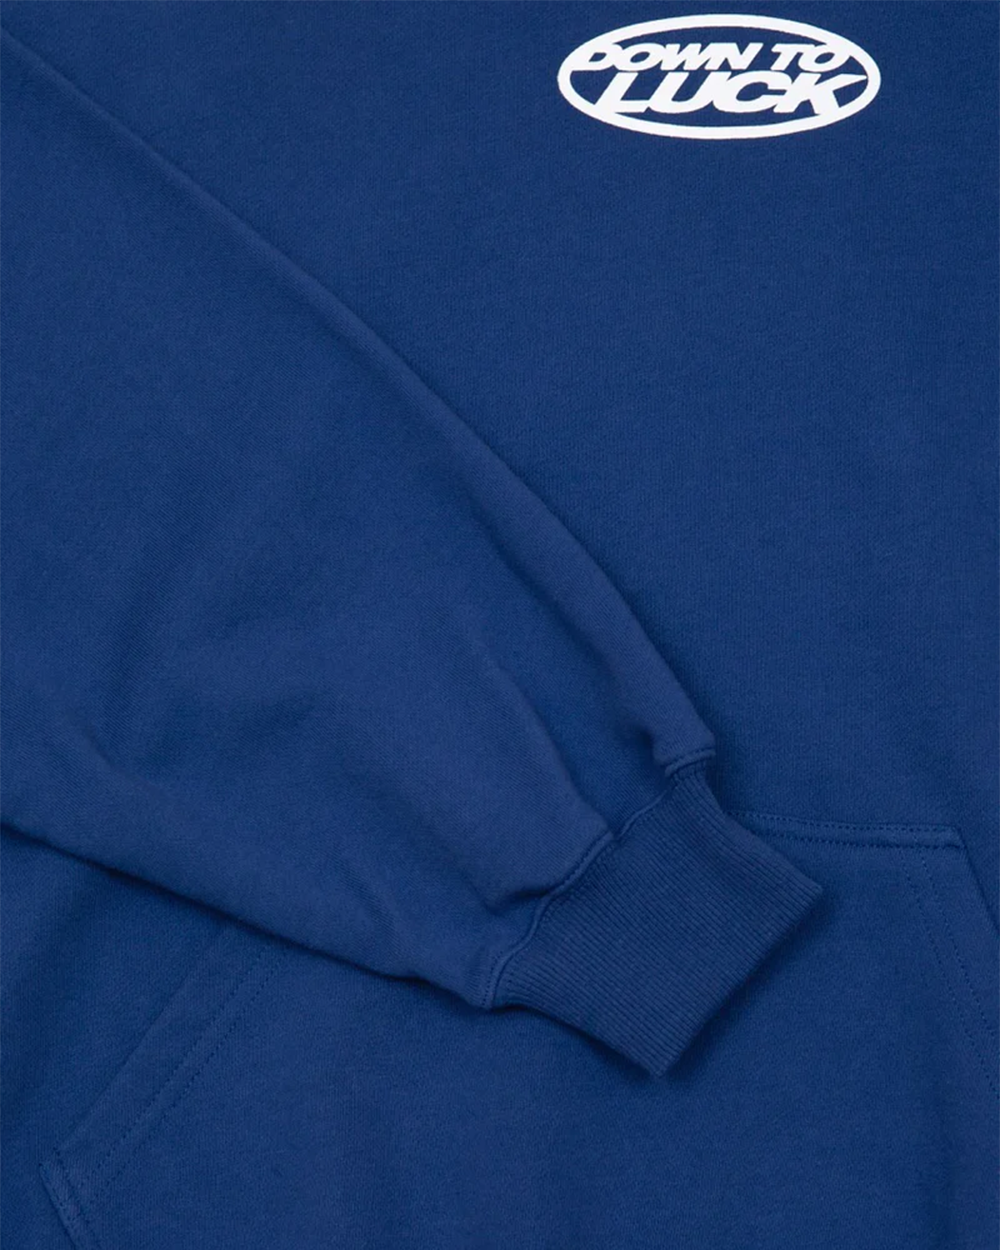 DOWN TO LUCK HOODIE BRIGHT BLUE